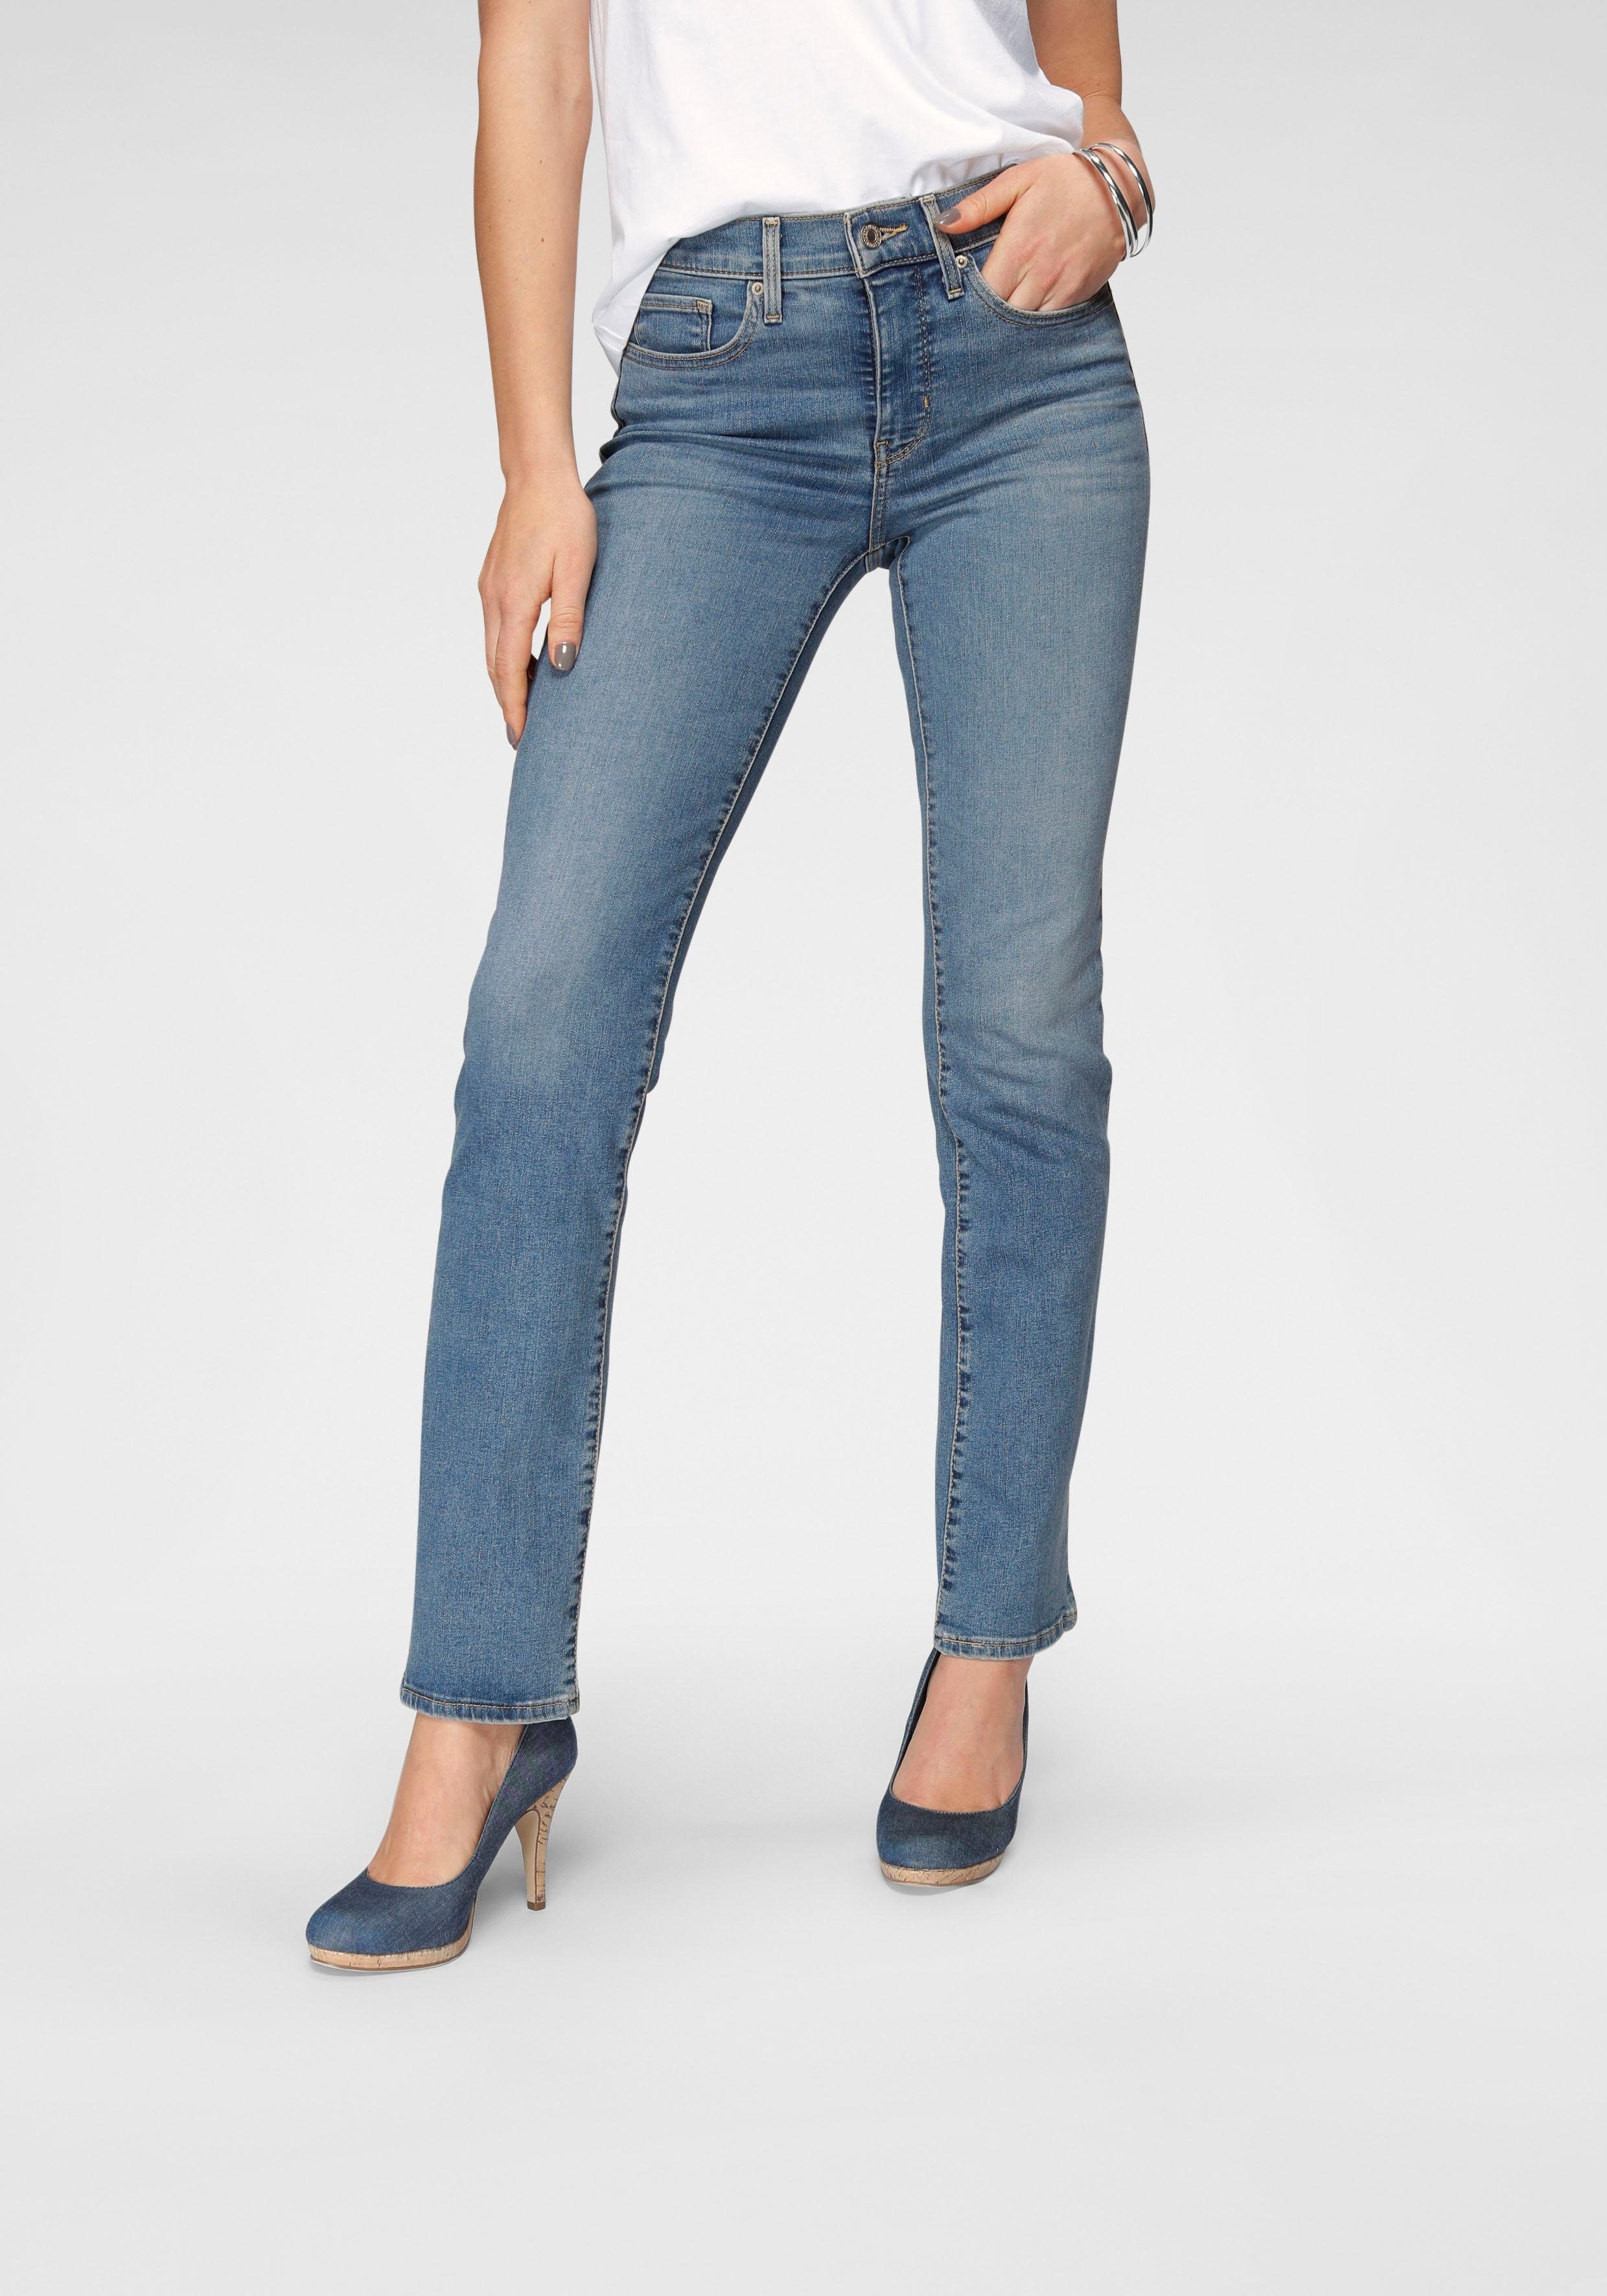 Levi's® Gerade Jeans »314 Shaping Straight« kaufen | OTTO